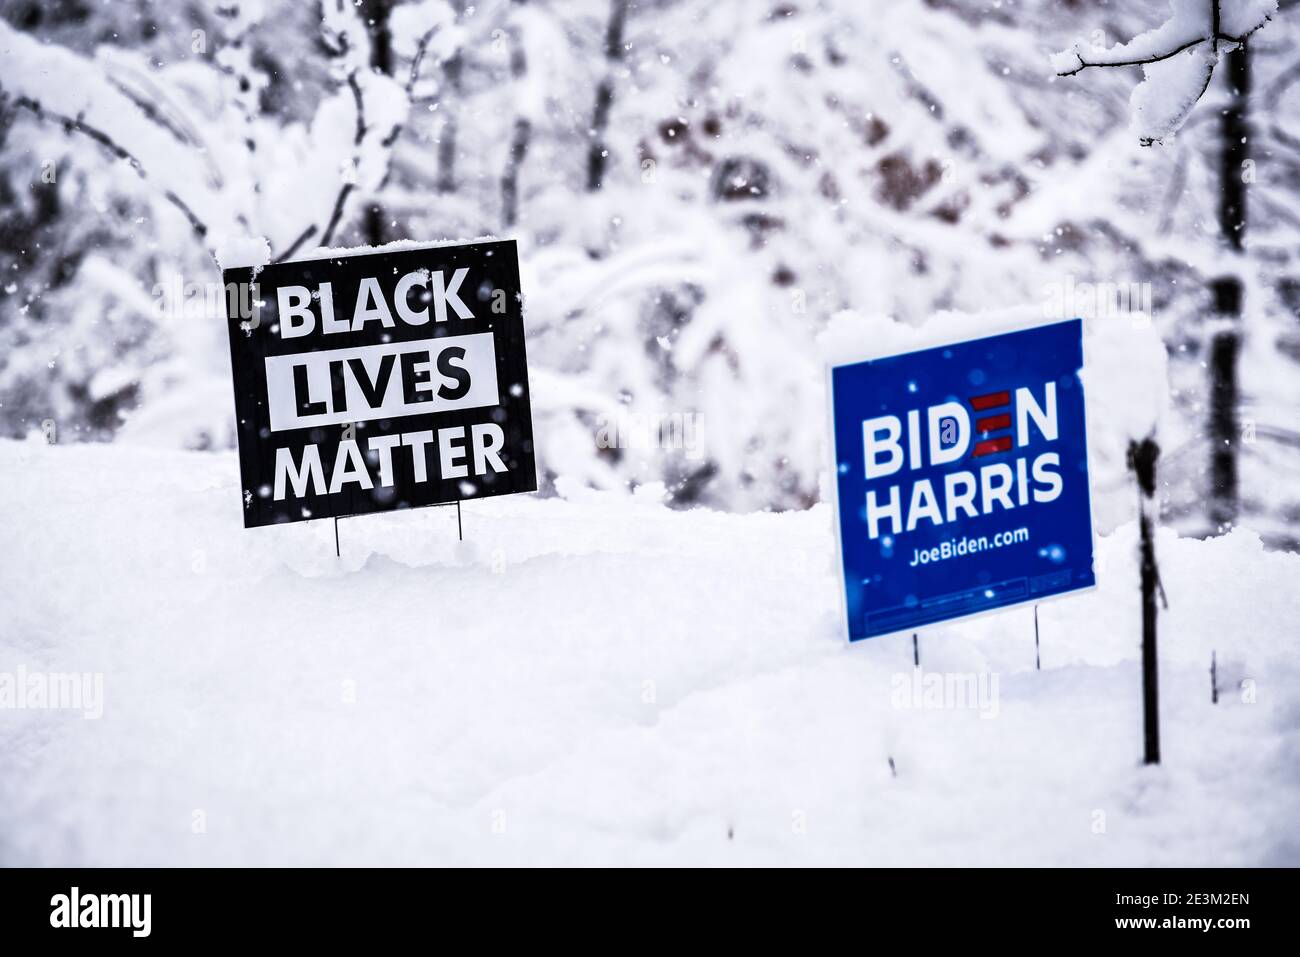 Dramatic image of Black Lives Matter, Biden Harris signs in the snow. Stock Photo